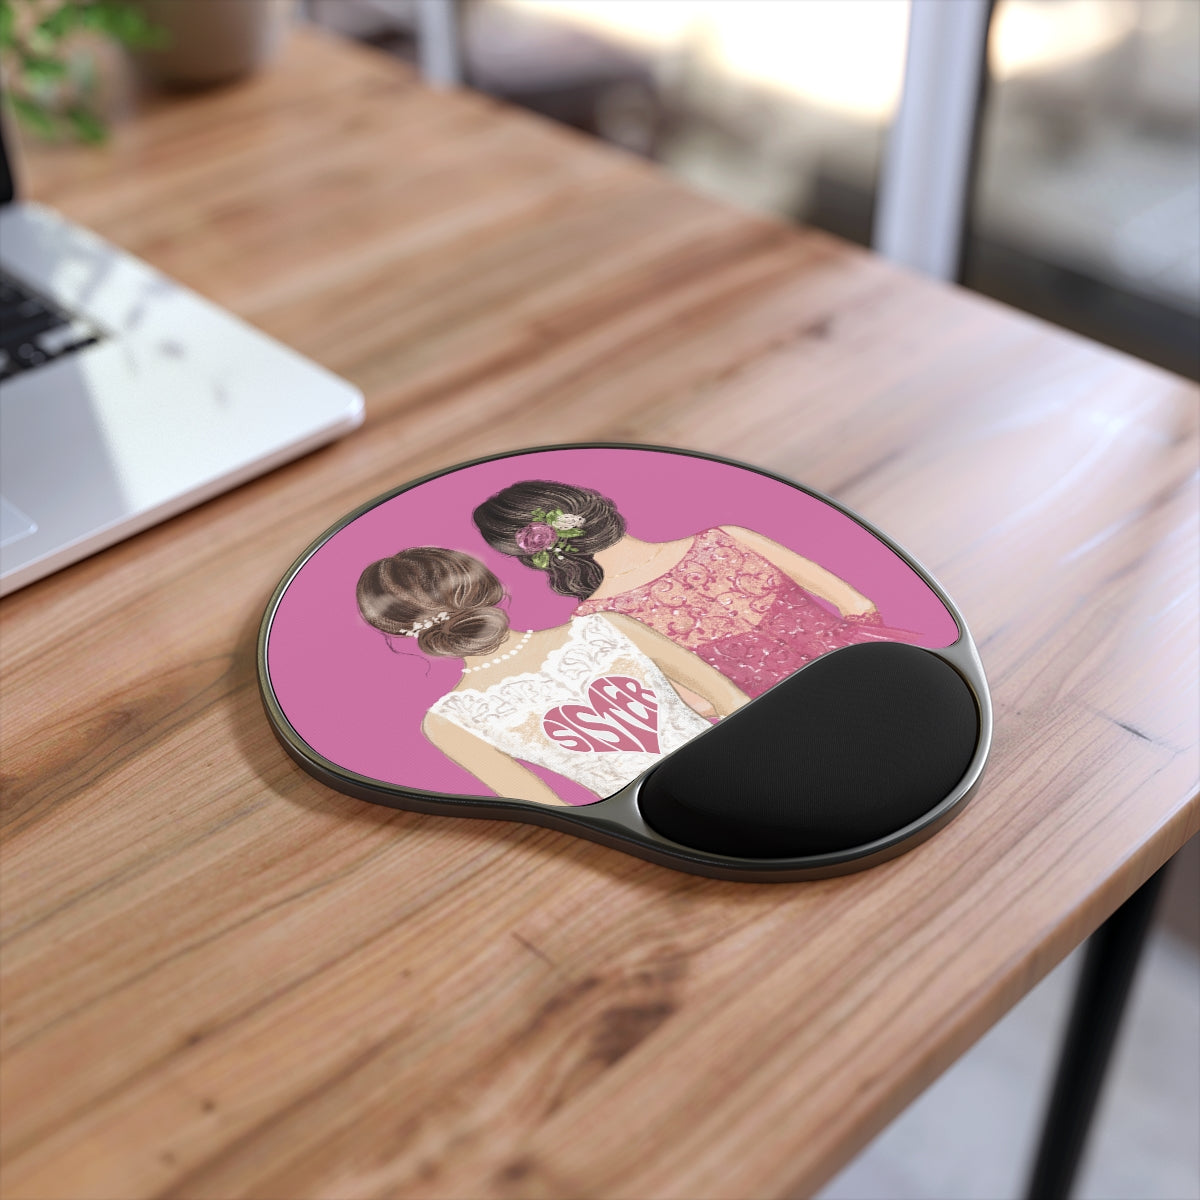 Mouse Pad With Wrist Rest, Cute Sisters Graphics, Gift for Sister, Cousin, Friend